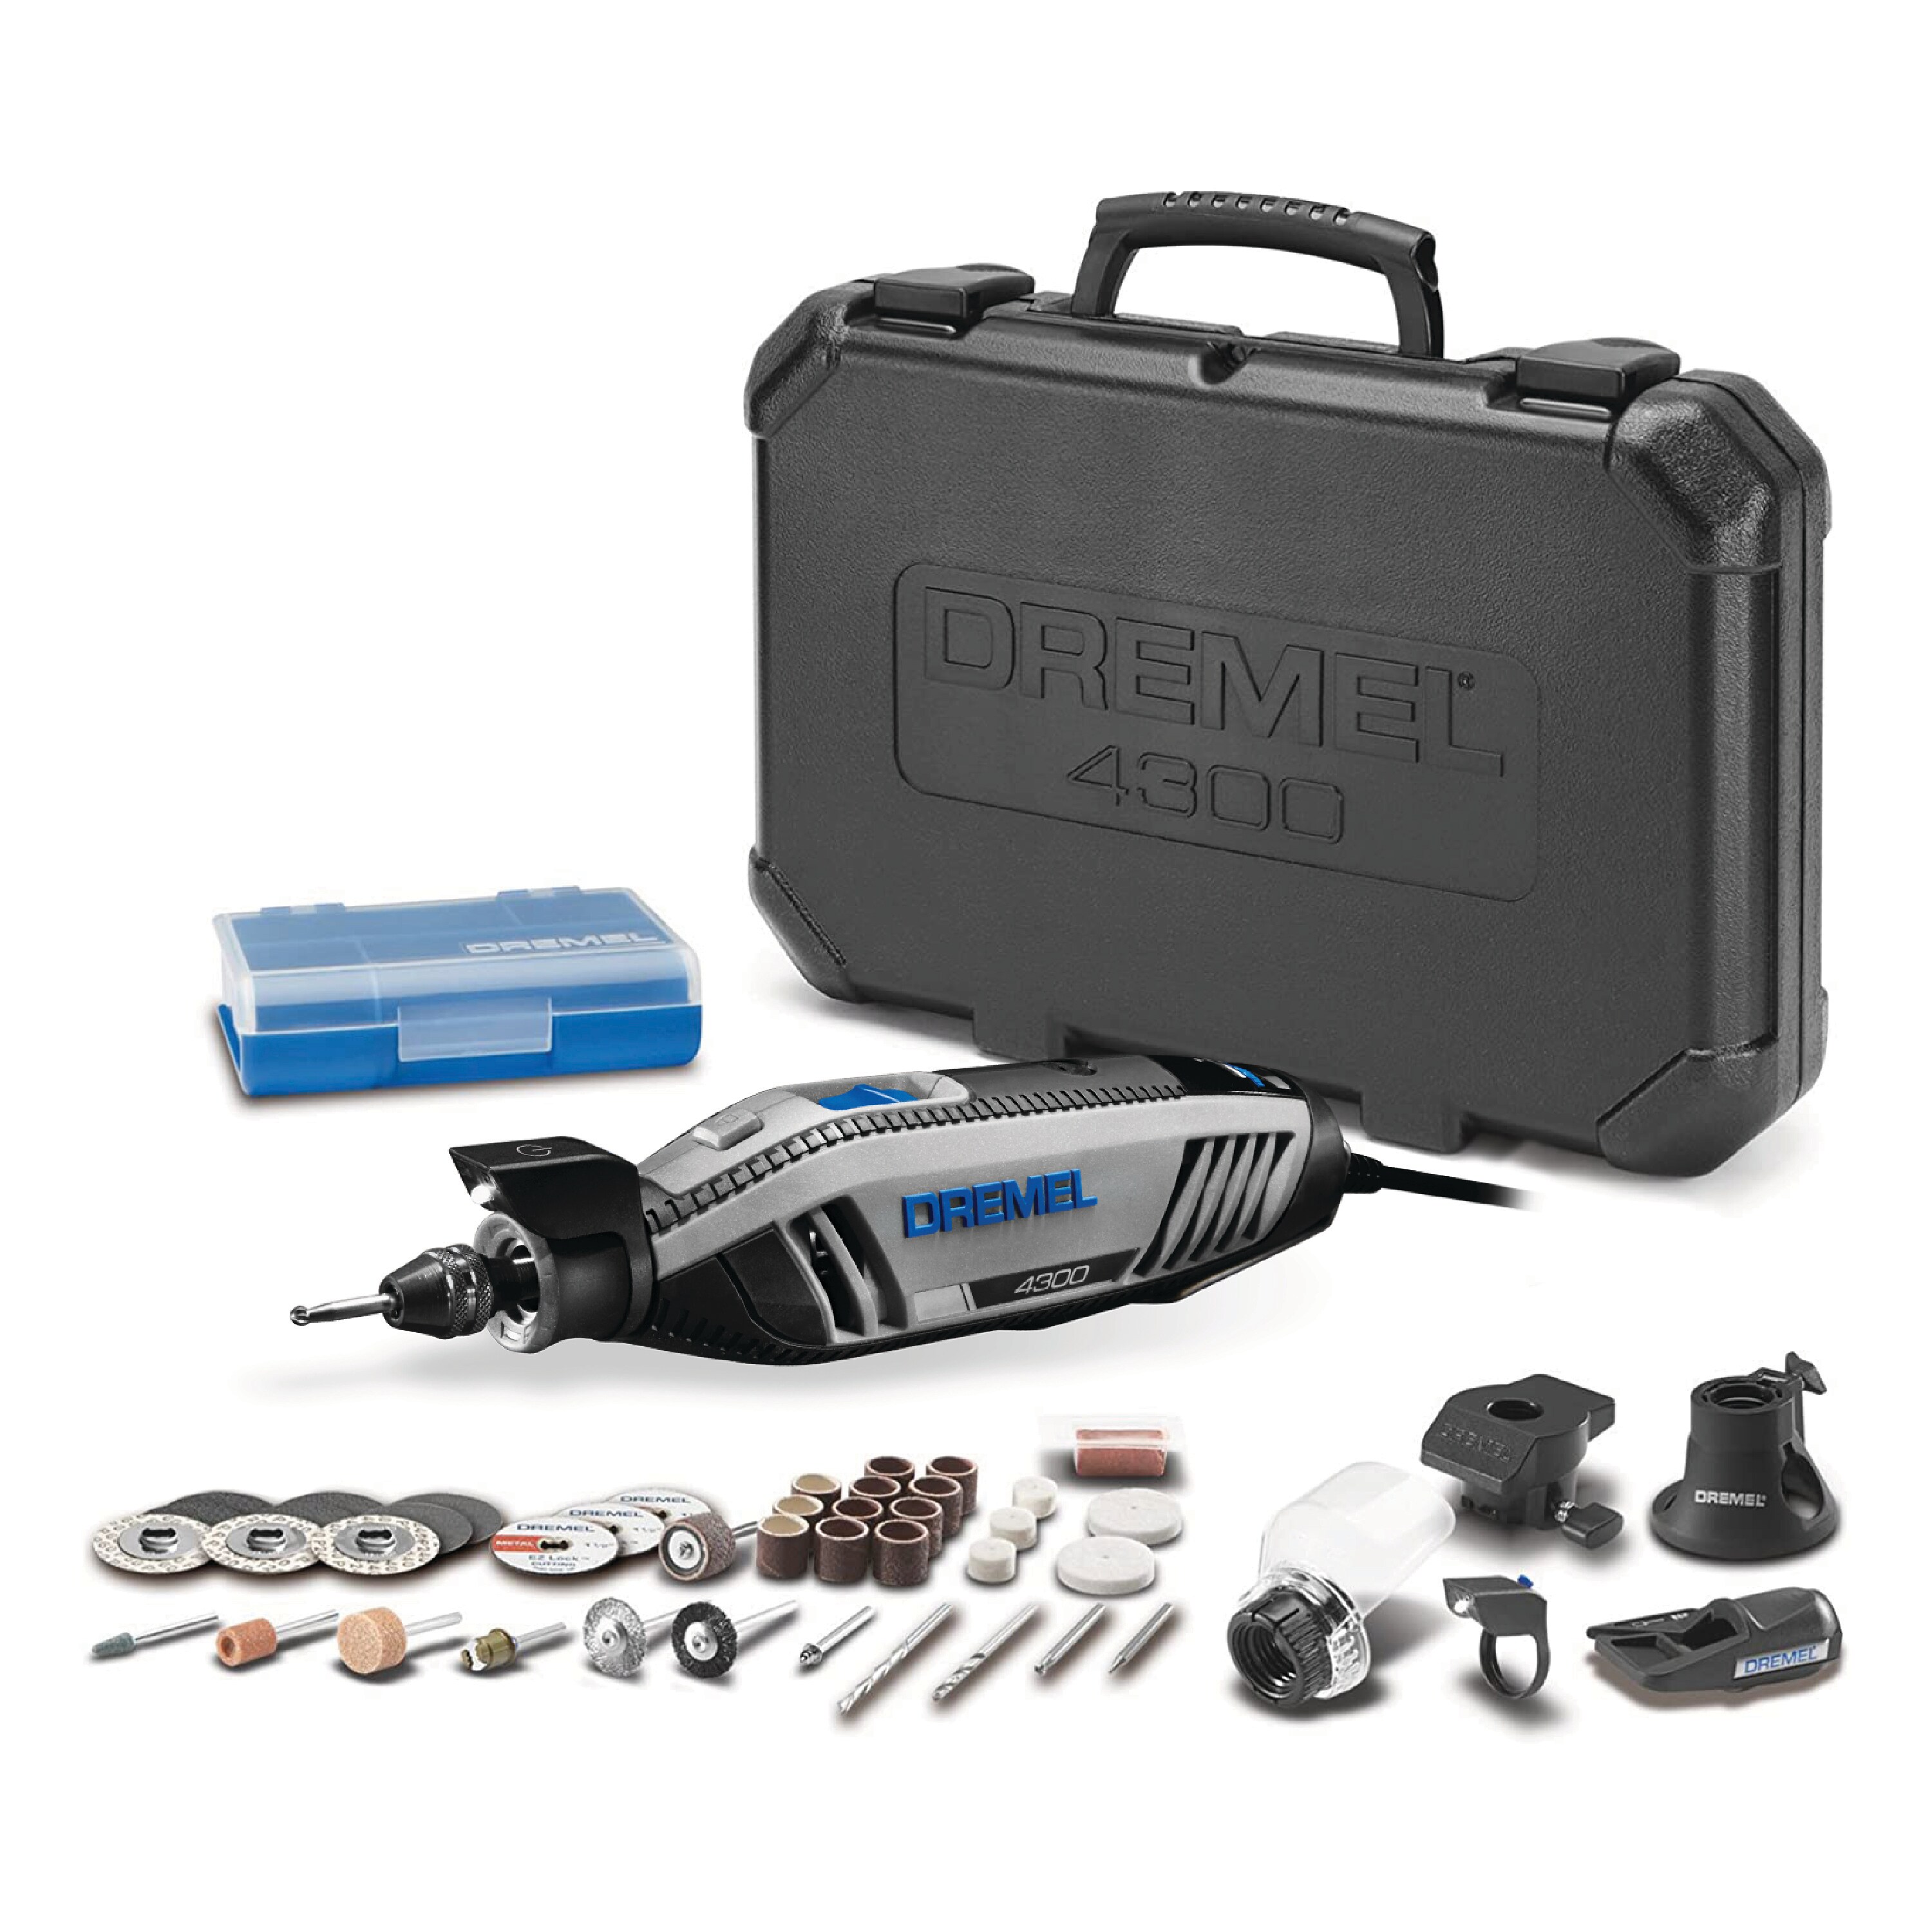 Shop Dremel 3000 Corded Variable Speed Rotary Tool with 1 Attachment and 25  Accessories + Flex Shaft Attachment at